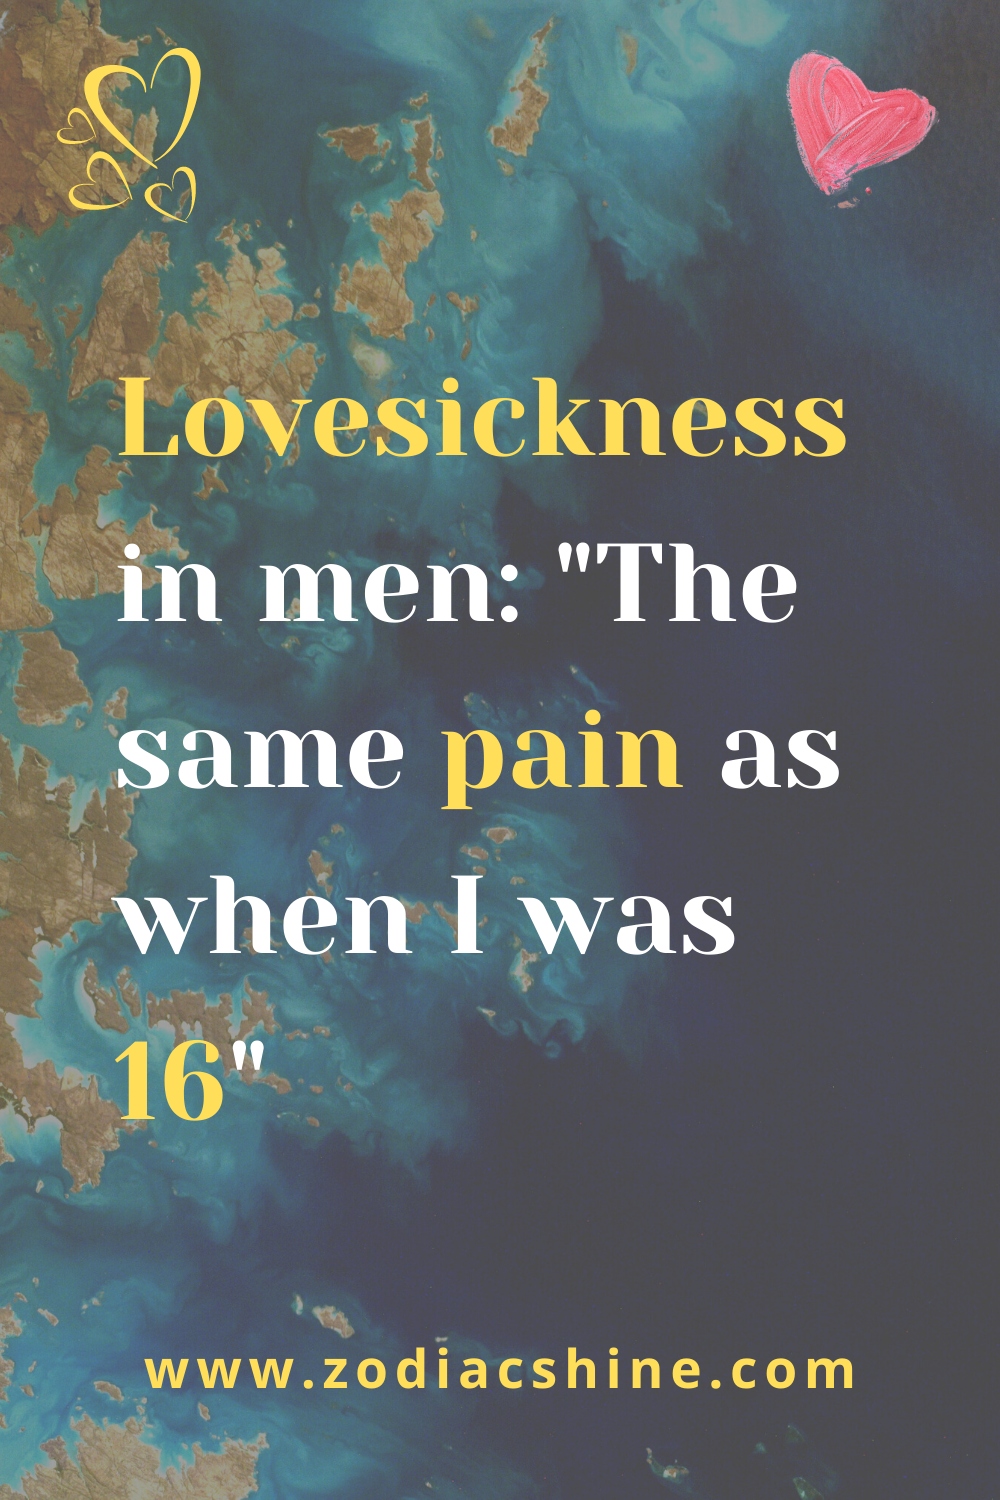 Lovesickness in men: "The same pain as when I was 16"